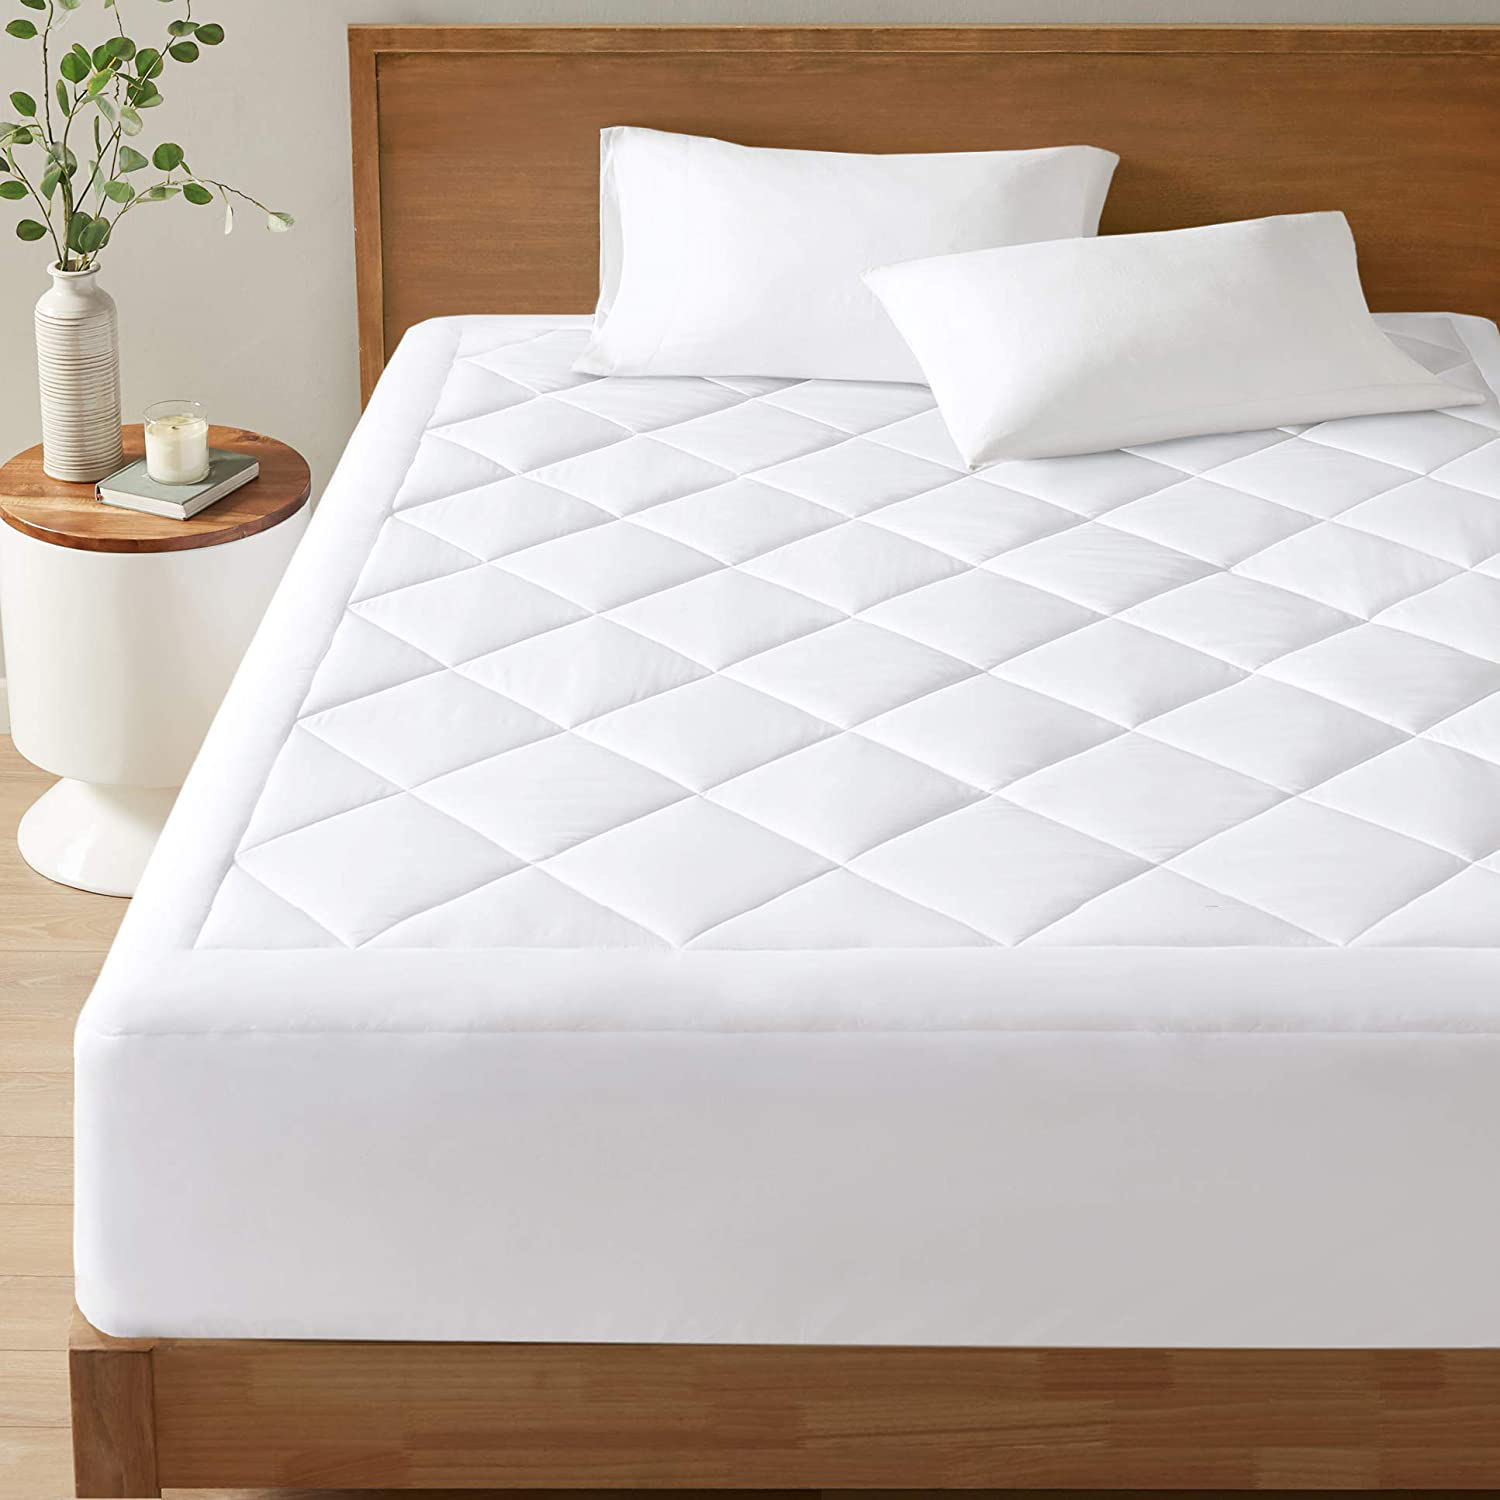 Degrees of Comfort Premium Soft Waterproof Mattress Pad Cal King Size | Quilted Topper Fitted 15'' Inch Deep Pocket 3M Scotchgard Stain Resistant Protector Cover | Cooling, Washable, Breathable